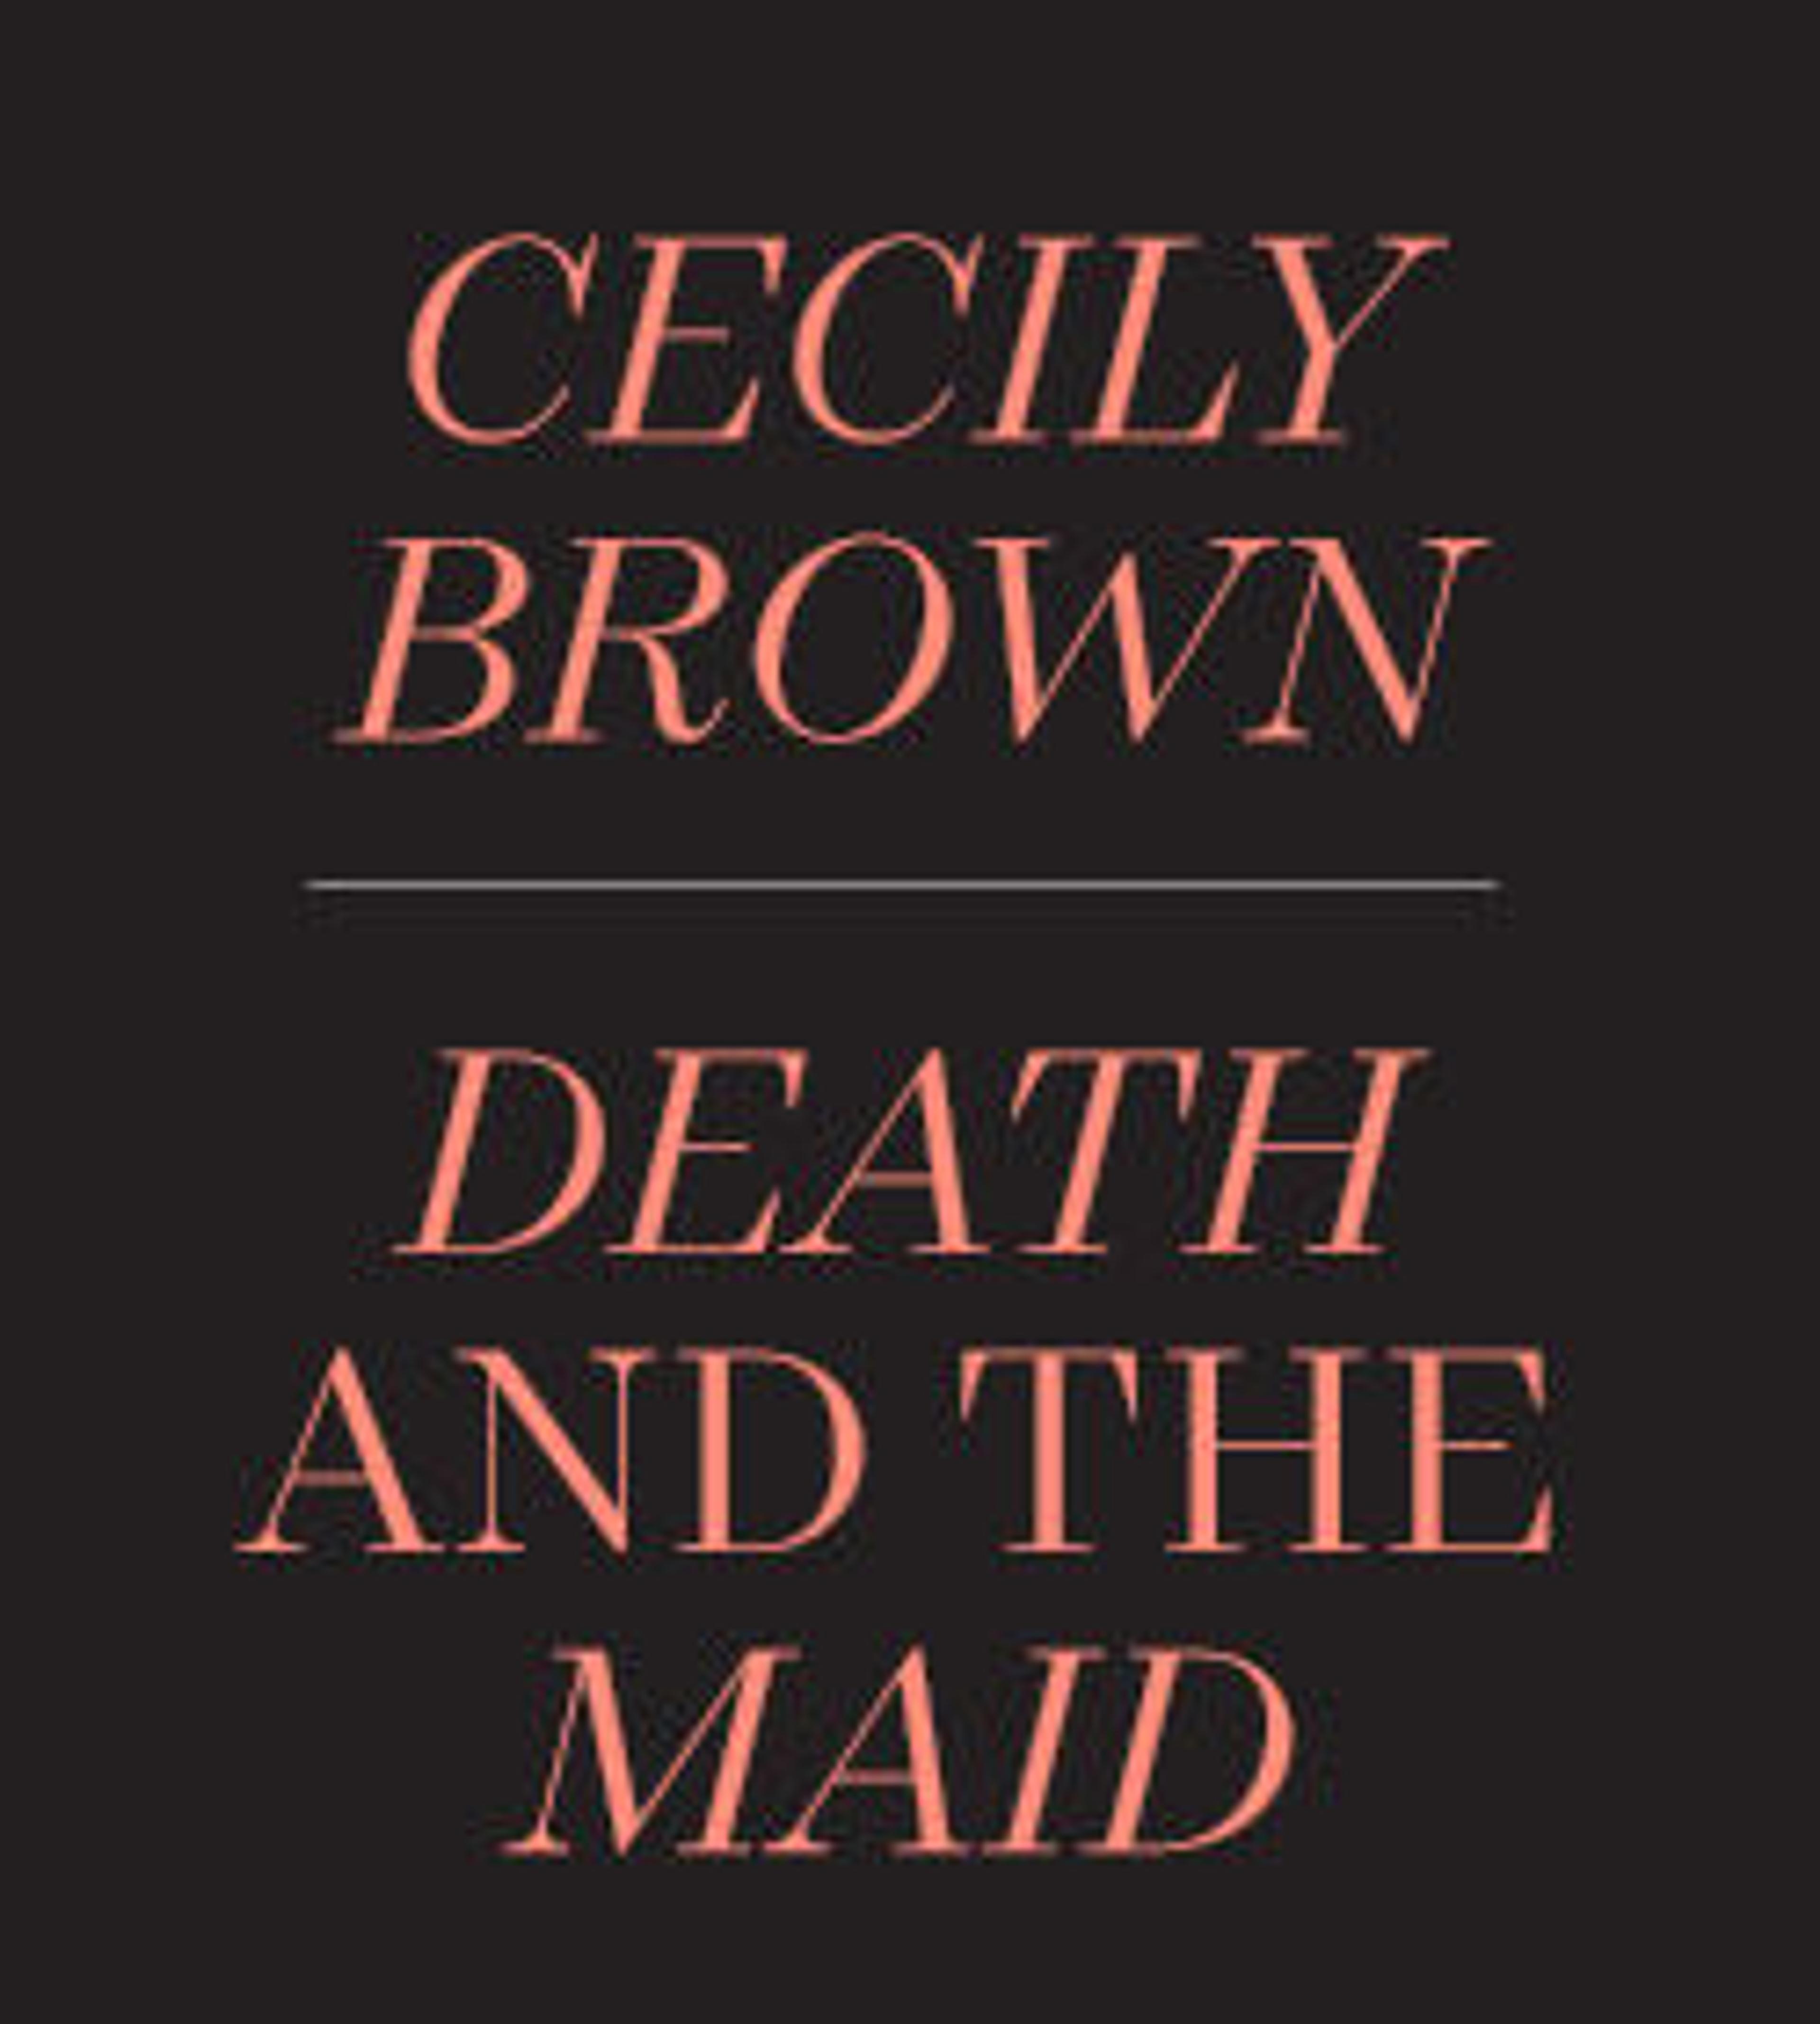 Cecily Brown Death and the Maid